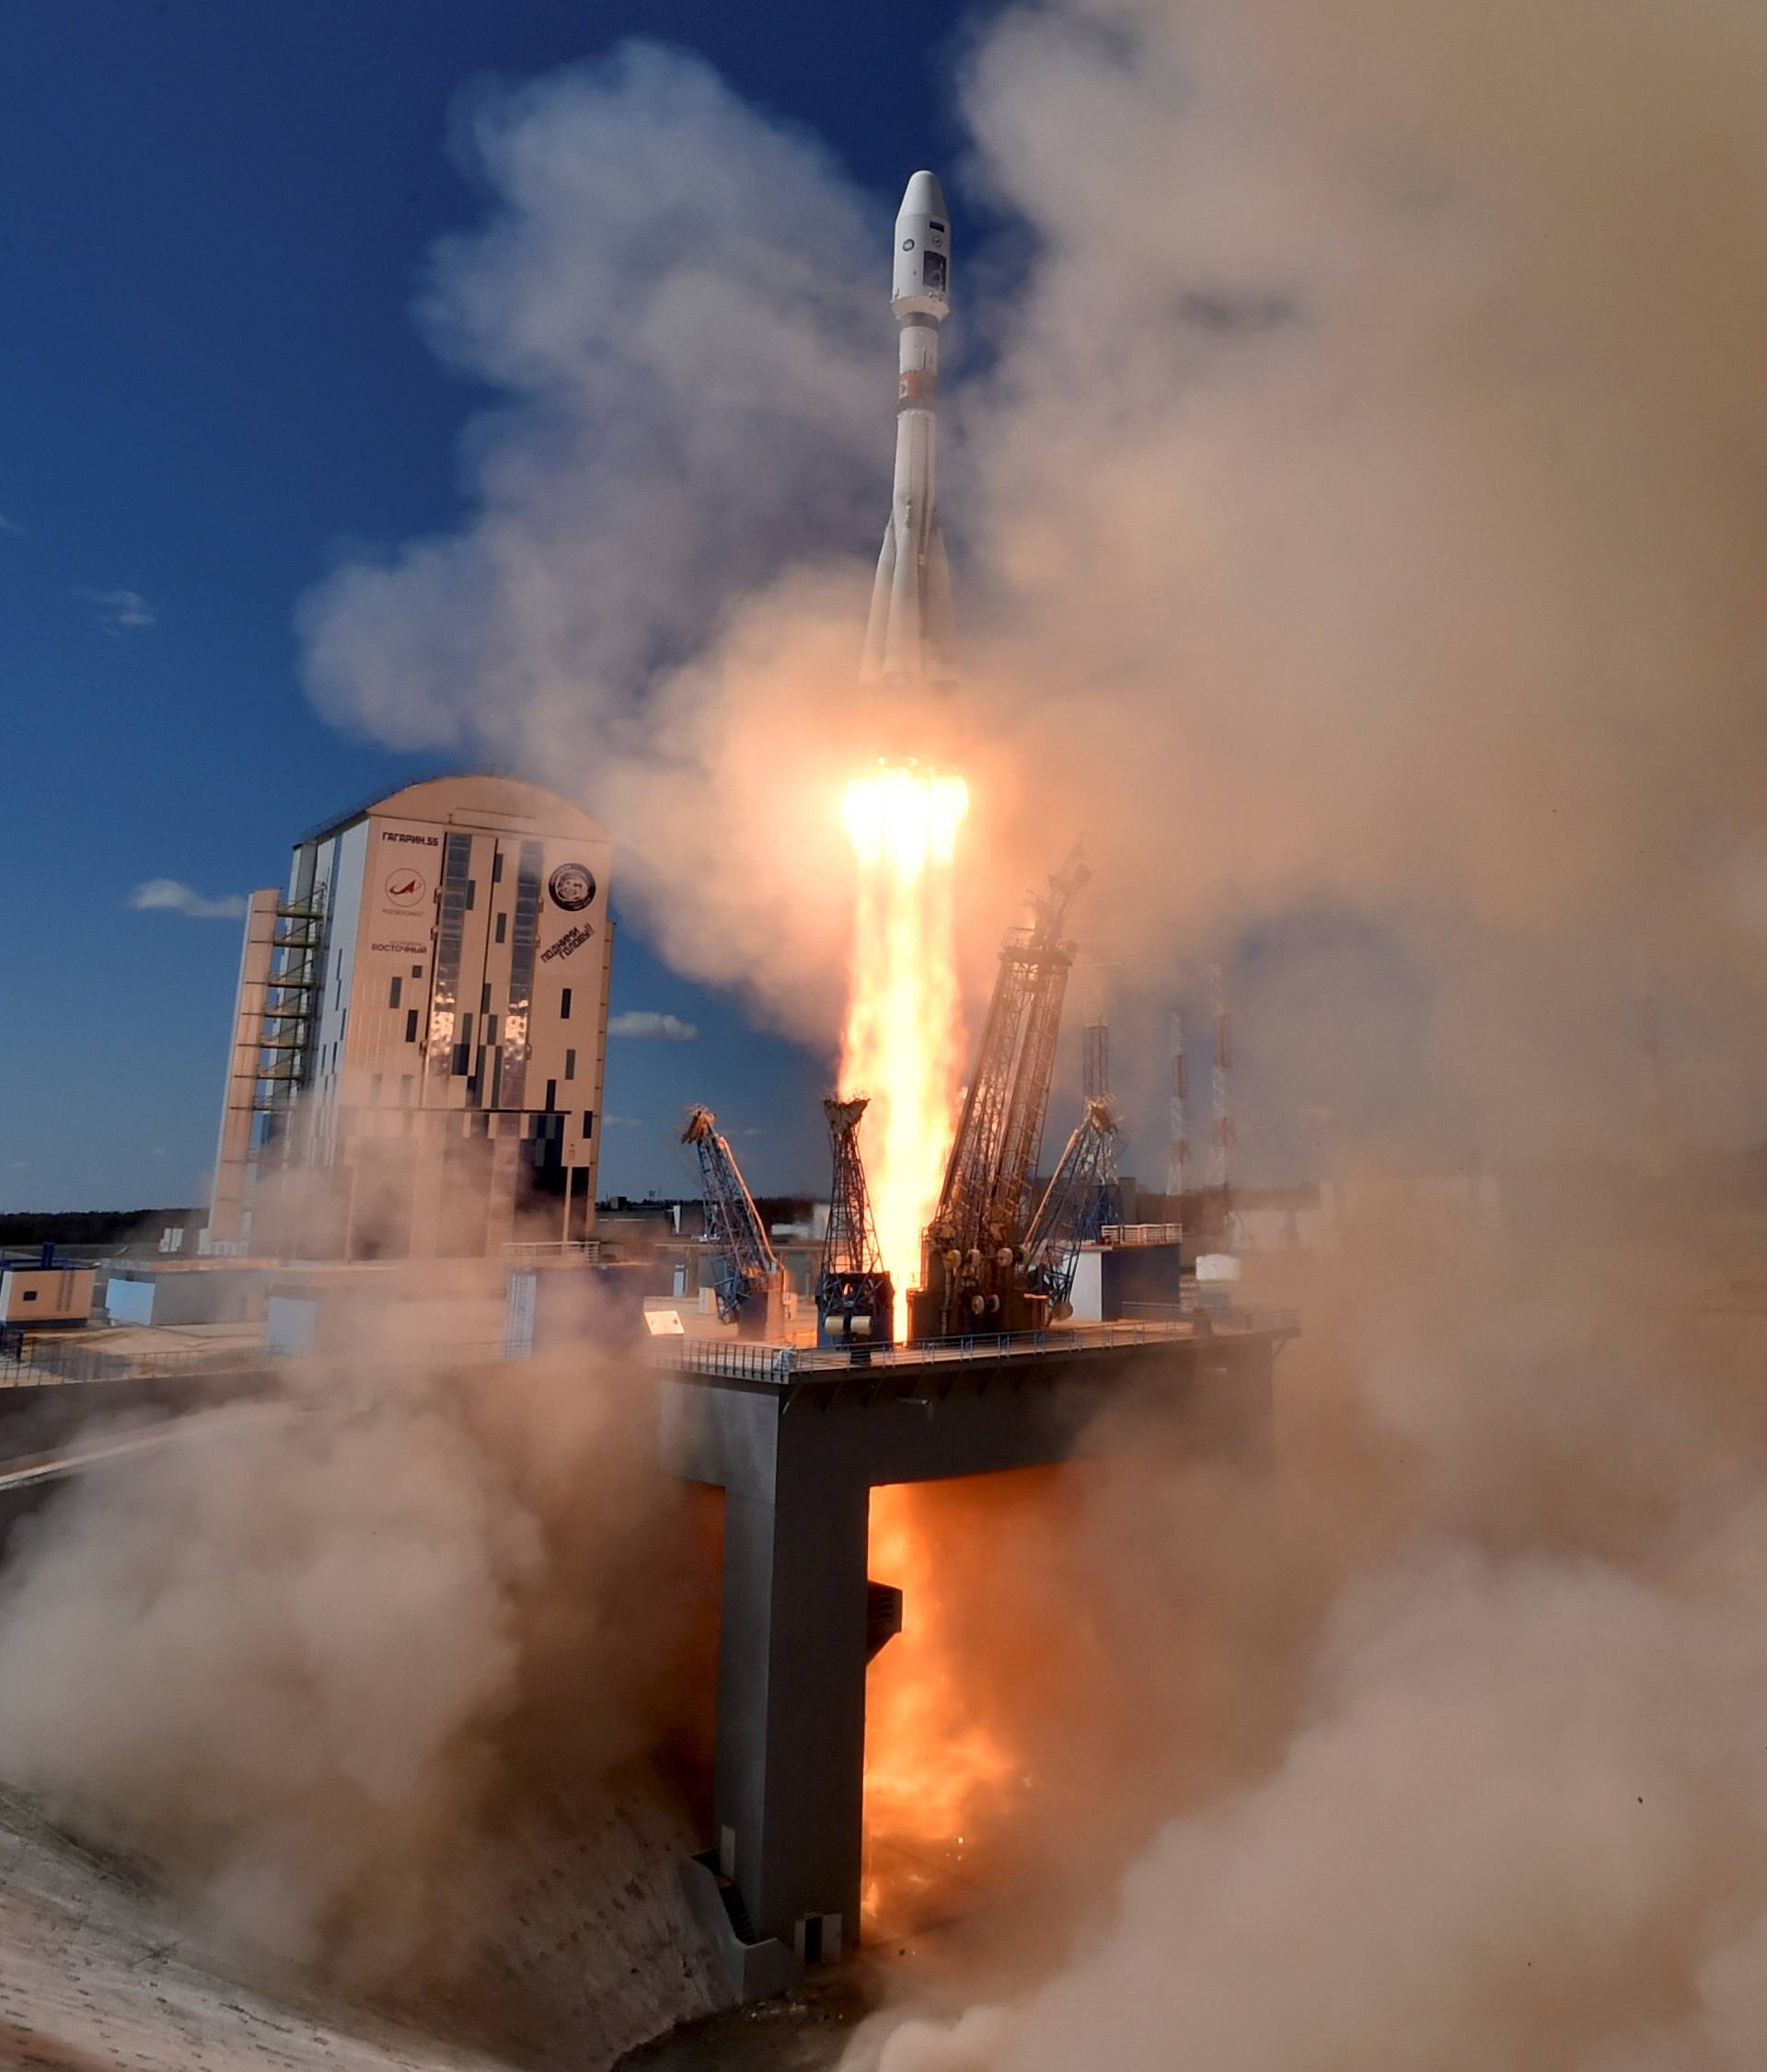 A Russian Soyuz 2.1A rocket carrying Lomonosov, Aist-2D and SamSat-218 satellites begins to lift off from the launch pad at the new Vostochny cosmodrome outside the city of Uglegorsk, about 200 kms from the city of Blagoveshchensk